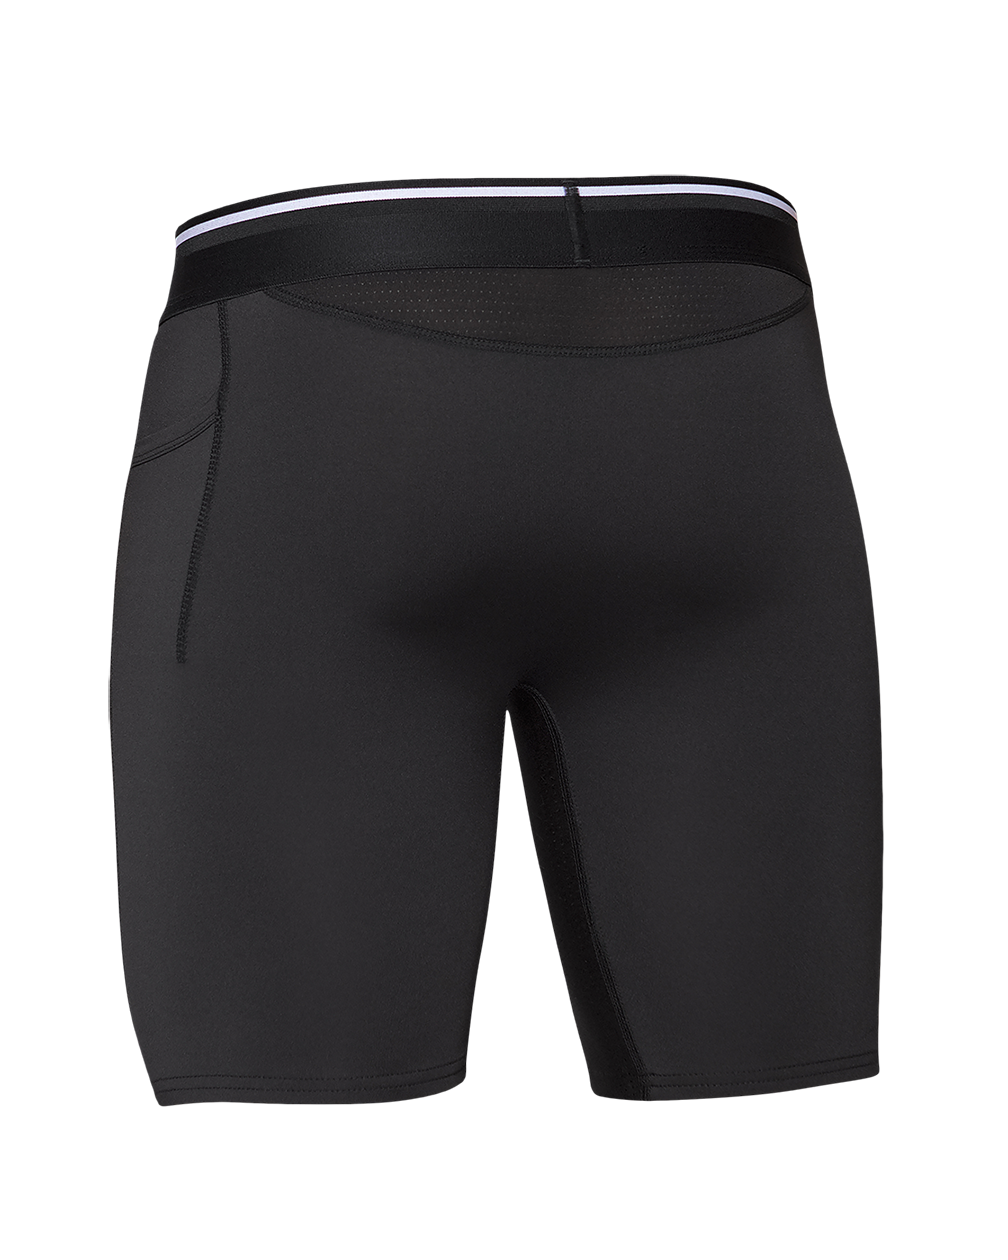 All Citizens: The Paradise Pocket Boxer Briefs are now restocked!